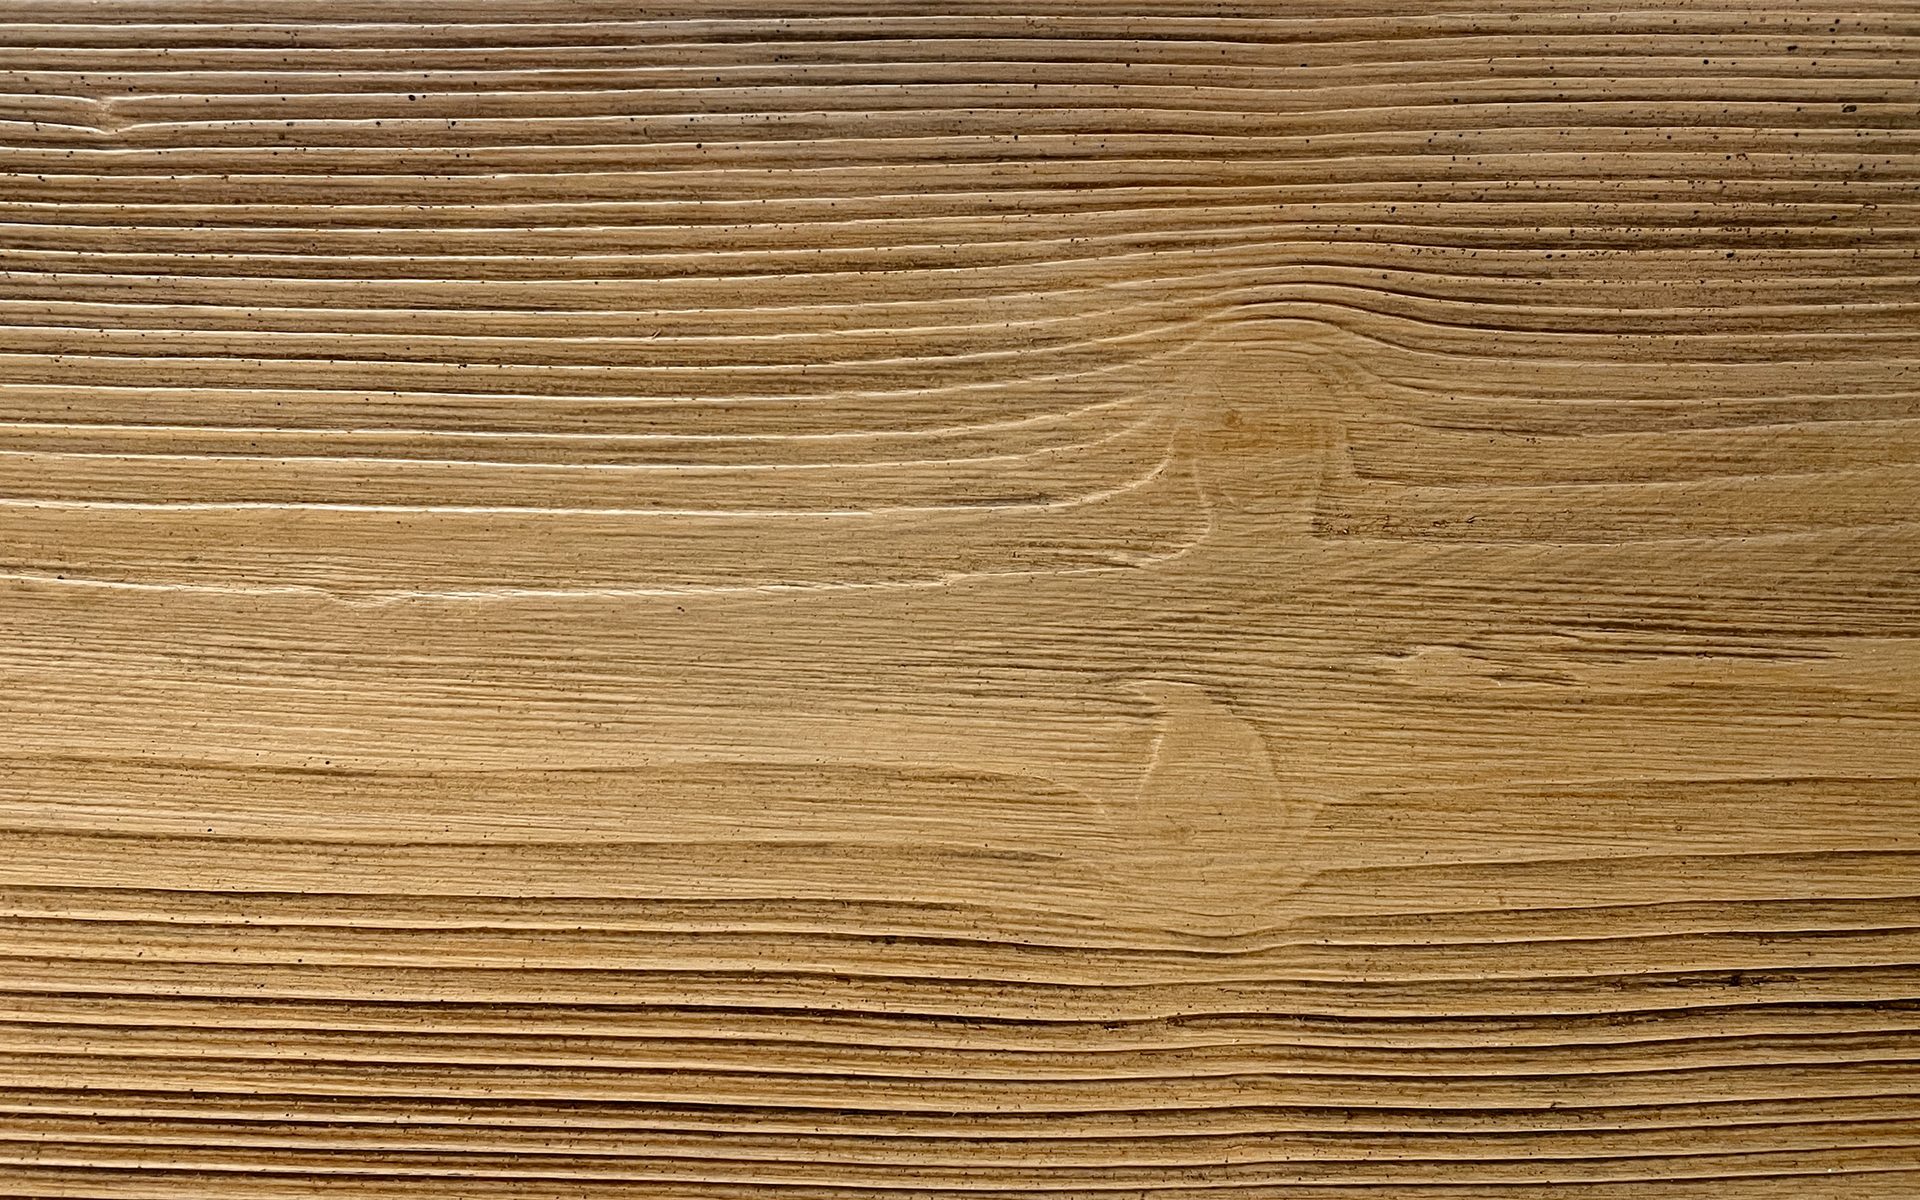 swatch of StoCast wood product called Walnut + Ironwood